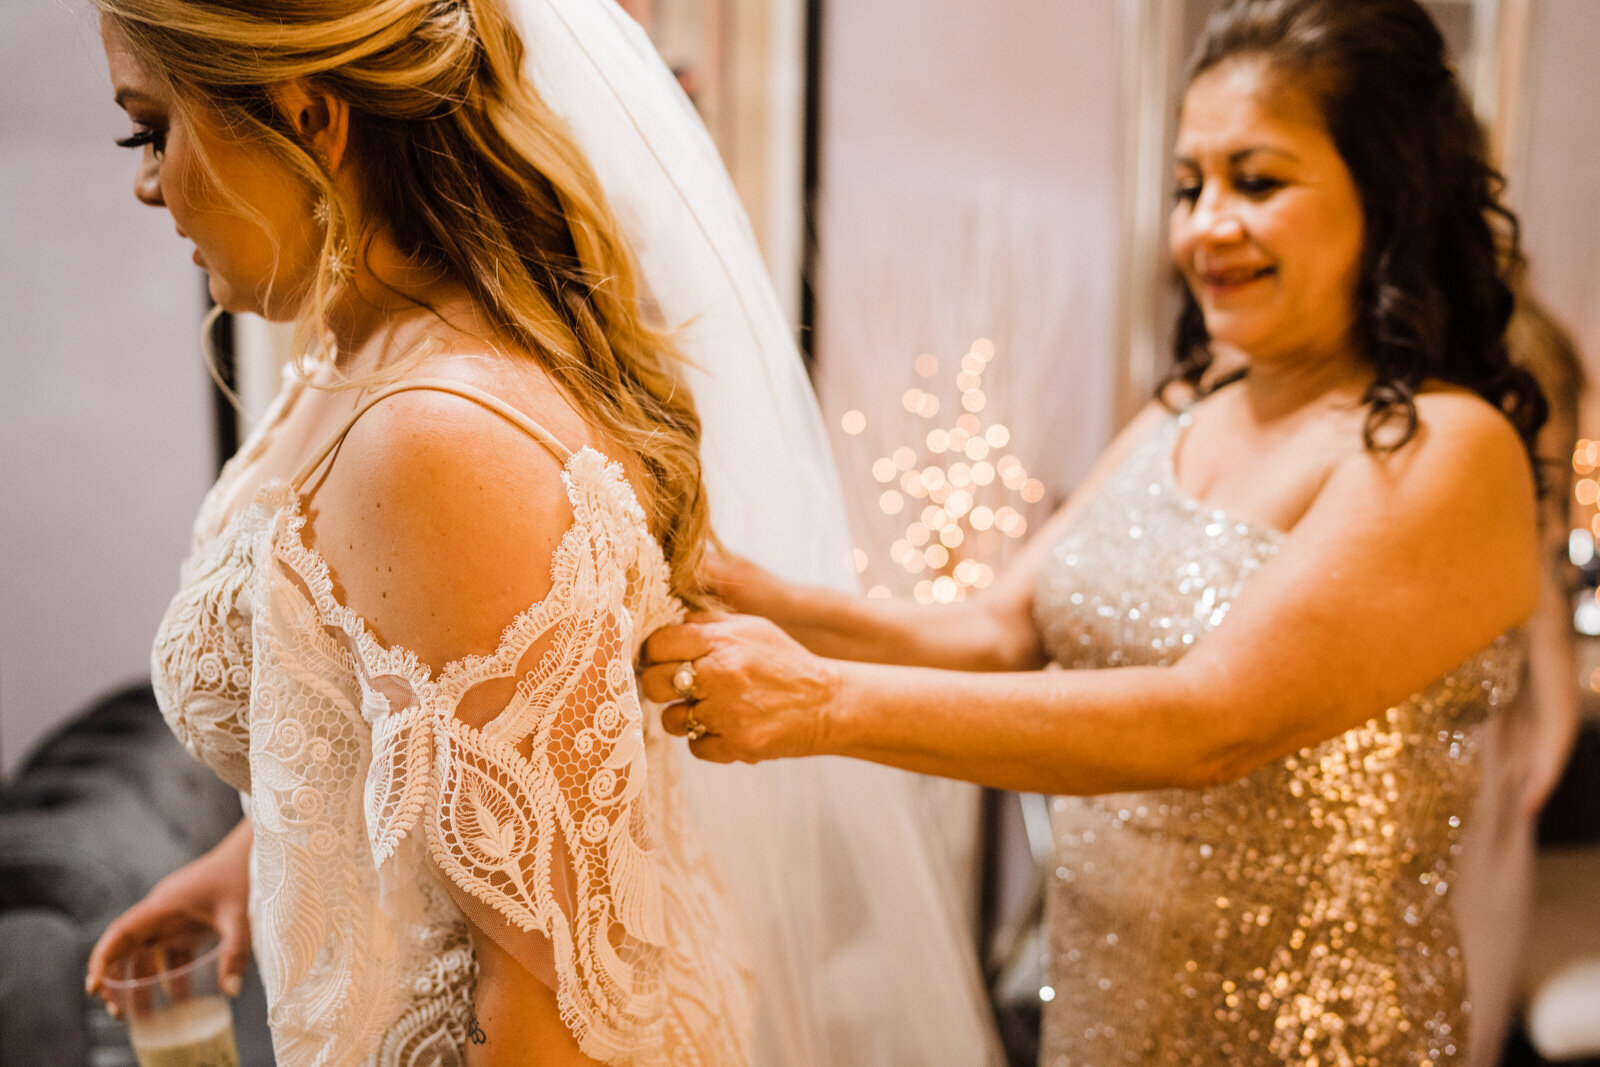 Mom helps bride get ready at Little Church of the West in Las Vegas